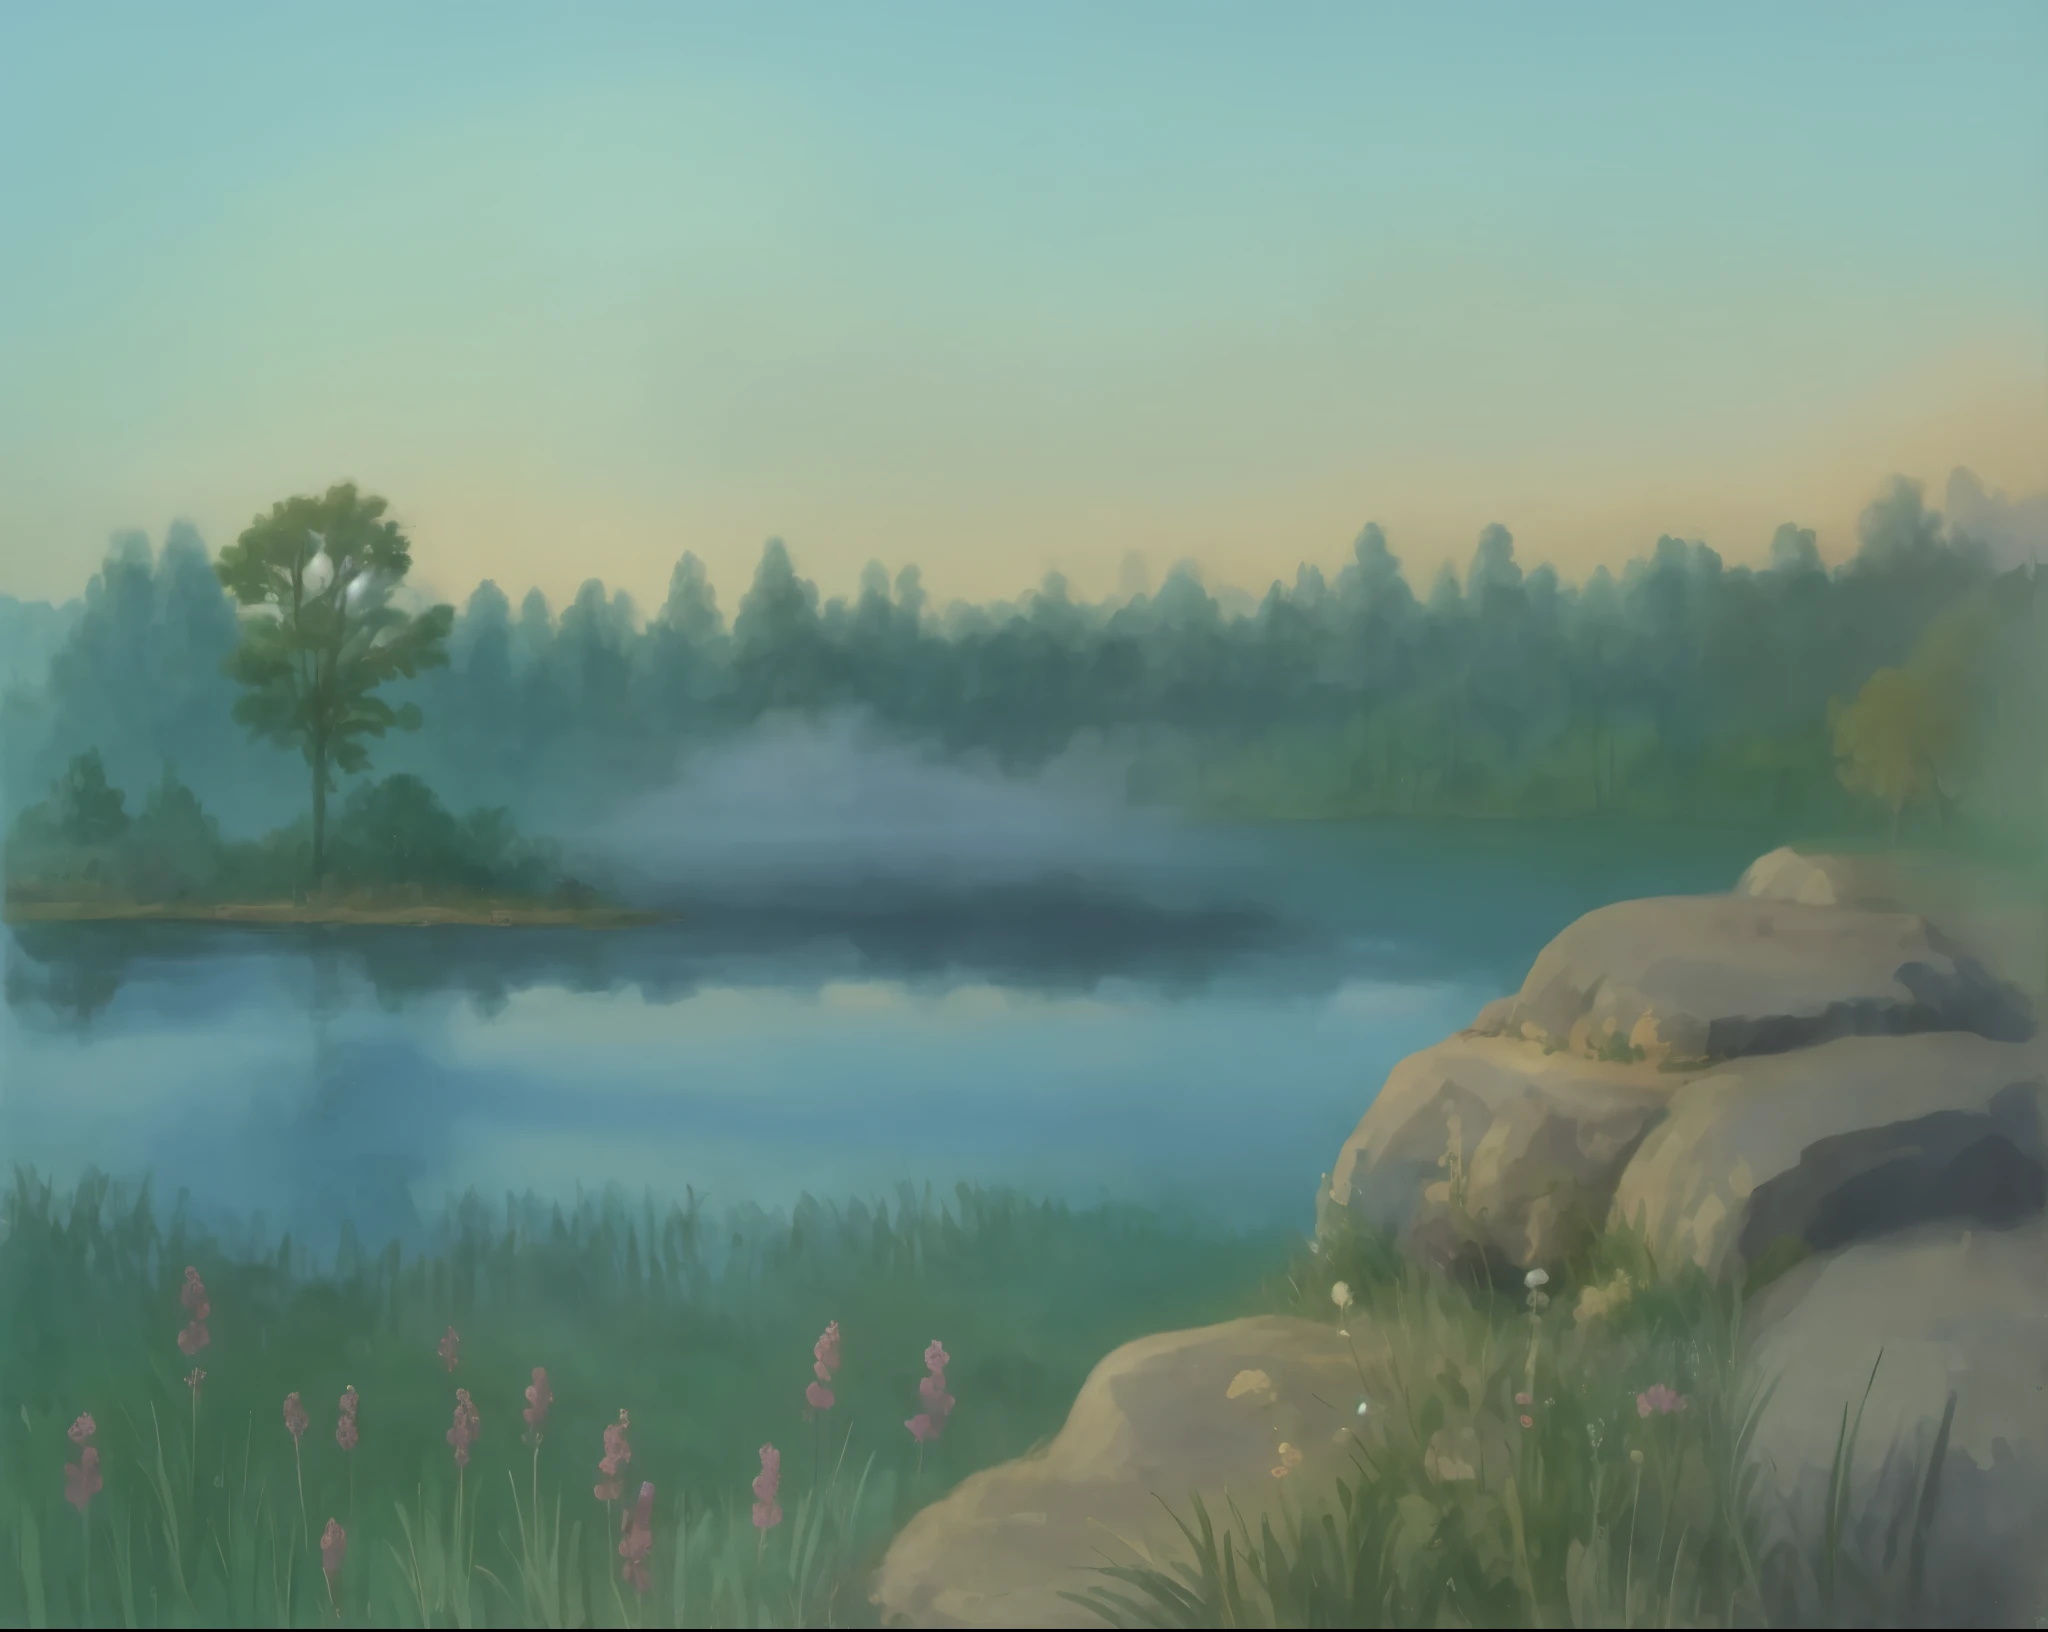 ((Oil painting 1,2)), evening time, a field with purple flowers in the foreground, fog over a lake, a large stone, a bush with small leaves, very detailed, ((strokes of paint)), (splashes of paint), atmospheric lighting, (impressionist style), (paint strokes visible), artstation trend, deep color, (paint texture), lake painting with tree and stone in the foreground, painted landscape, background image, landscape illustration, Digital painting, Detailed lake in the background plan, Swamp landscape, Gouache matte painting, digital landscape art, Little lake, nature painting, near a Little lake, landscape background, inspired by Isaac Levitan, inspired by Eero Järnefelt, Art station landscape